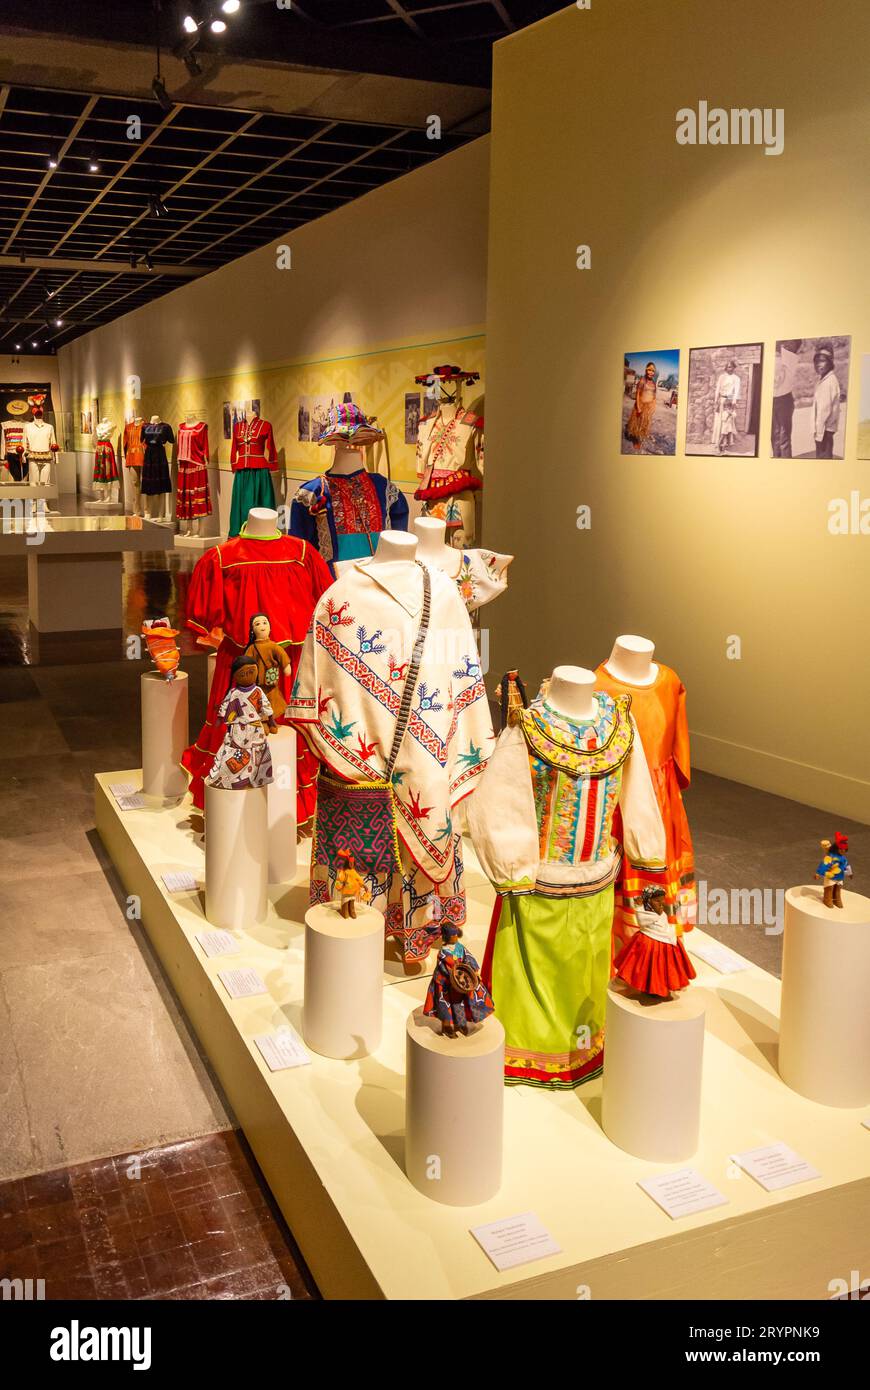 Mexico City, CDMX, Mexico, Traditional costumes of  Indigenous people at Museo de Arte Popular (in English, Museum of Popular art). Editorial only. Stock Photo